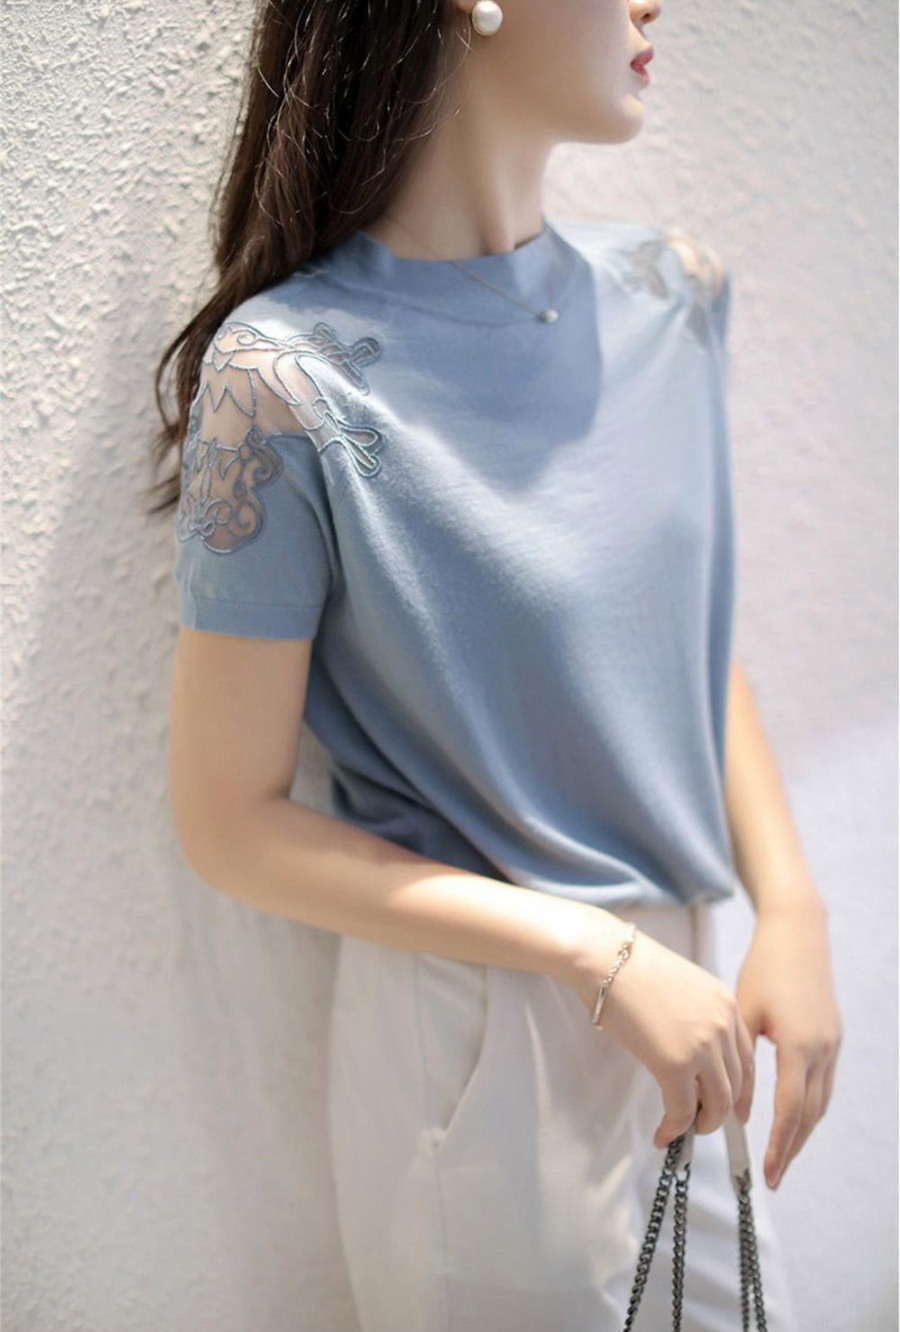 Short sleeve ice silk embroidery knitted gauze tops